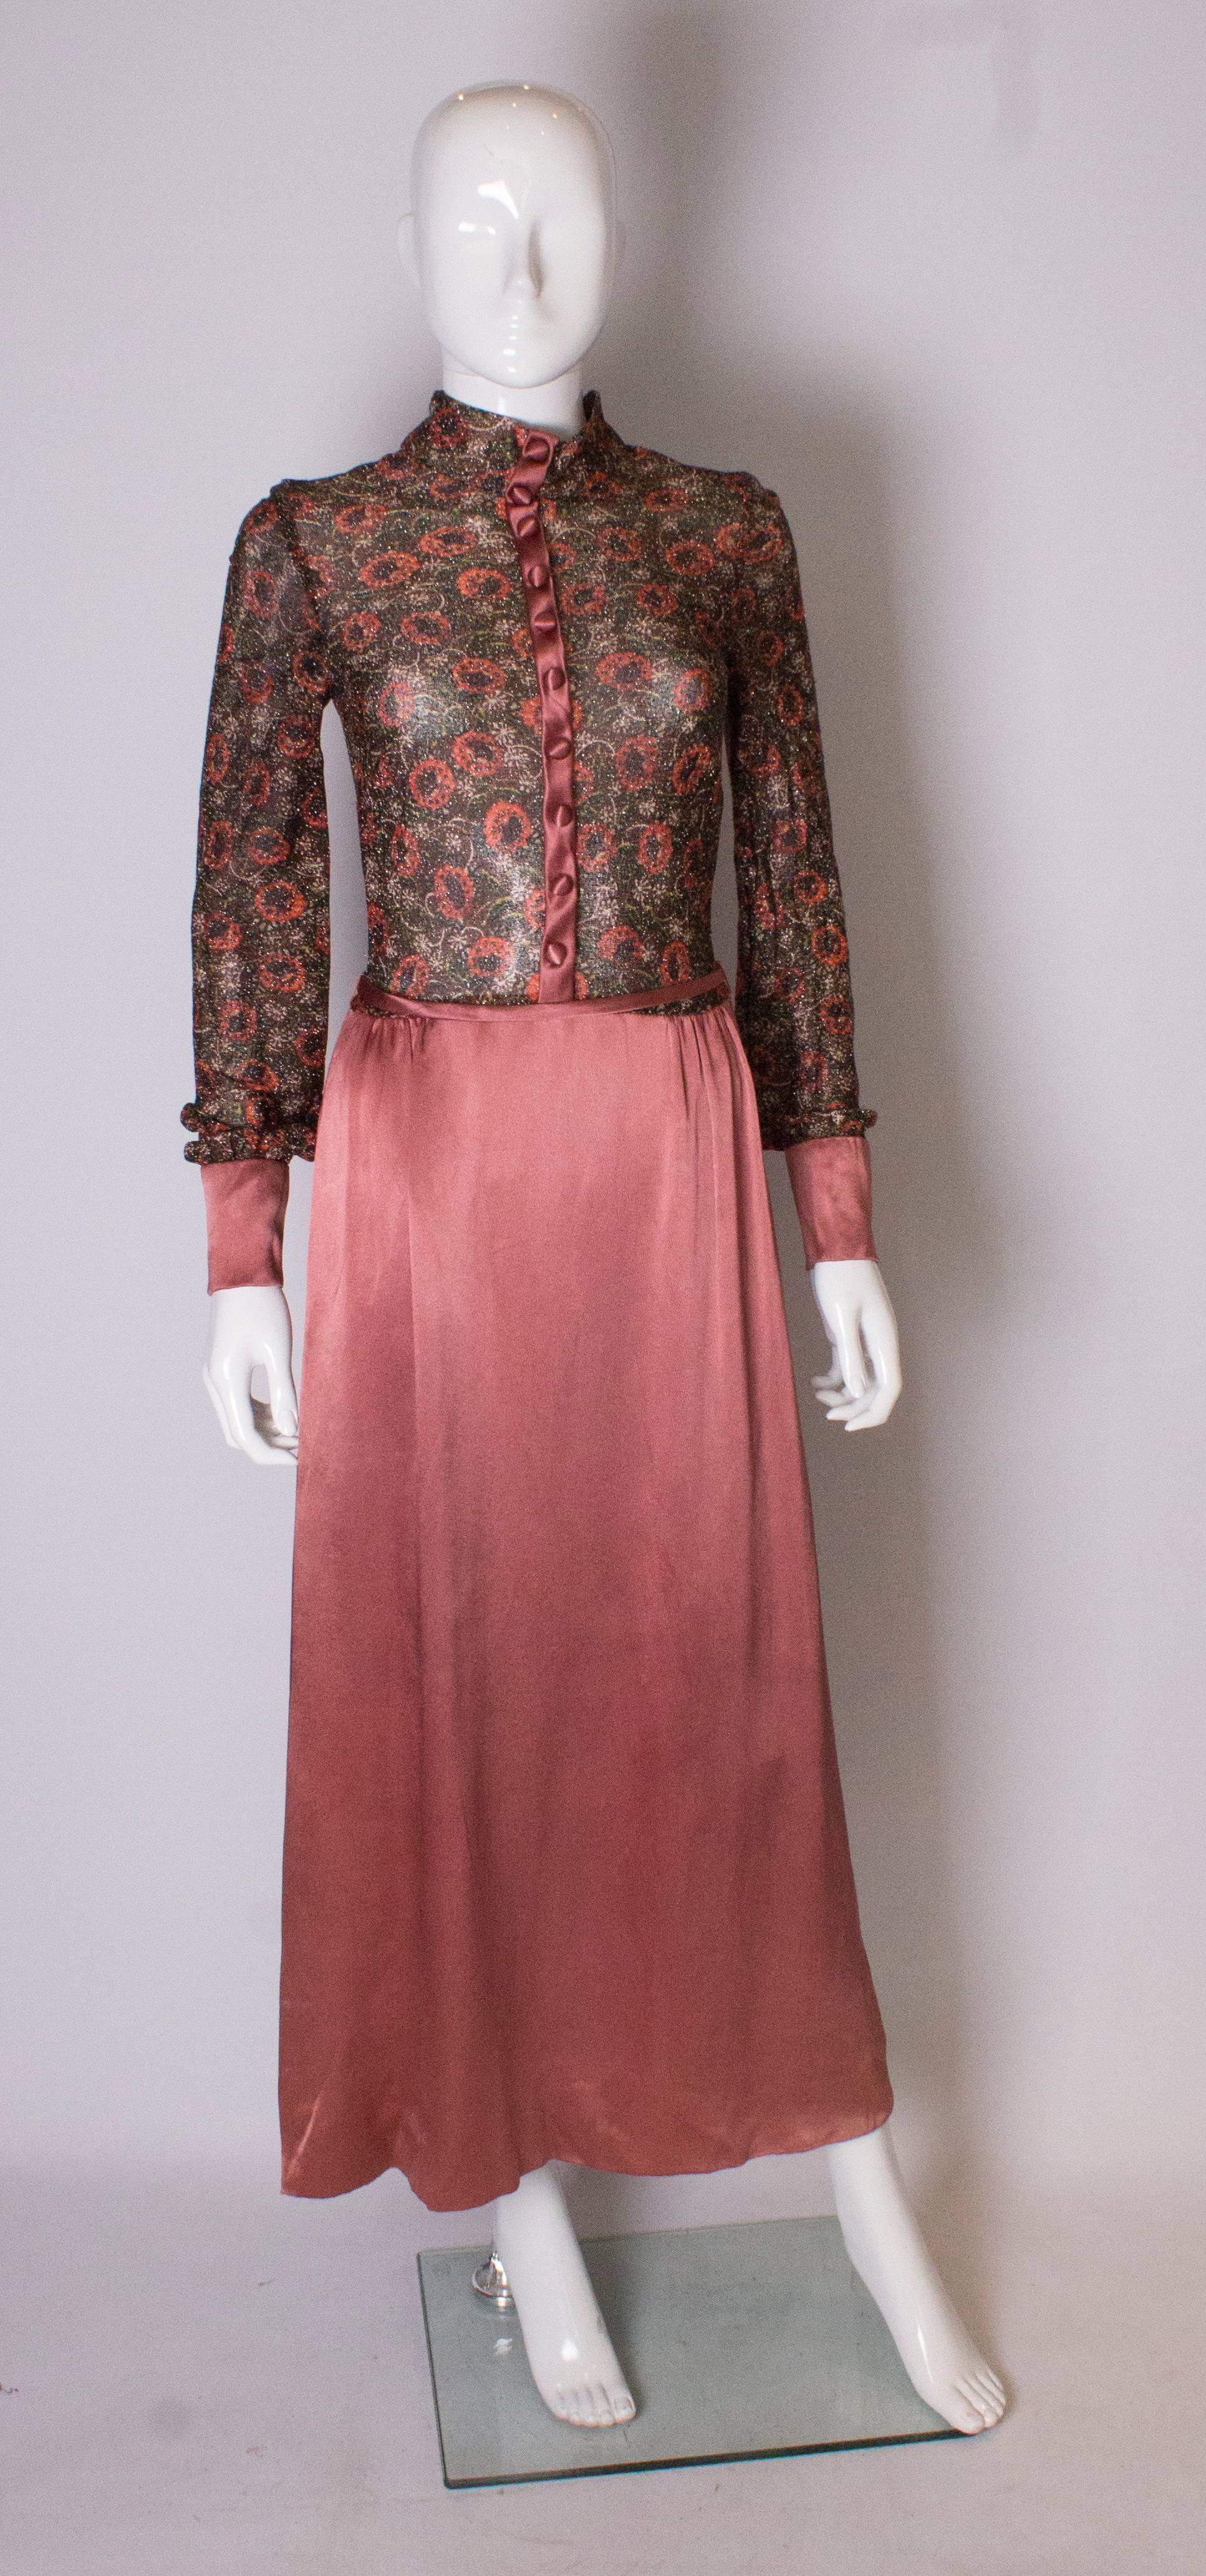 A stunning 1970s gown by Jean Varon. The upper part is a soft gold colour lurex with a floral design. The lower skirt area is a dusty pink colour. The dress has wide cuffs with four buttons and there are ten decorative covered buttons on the front.